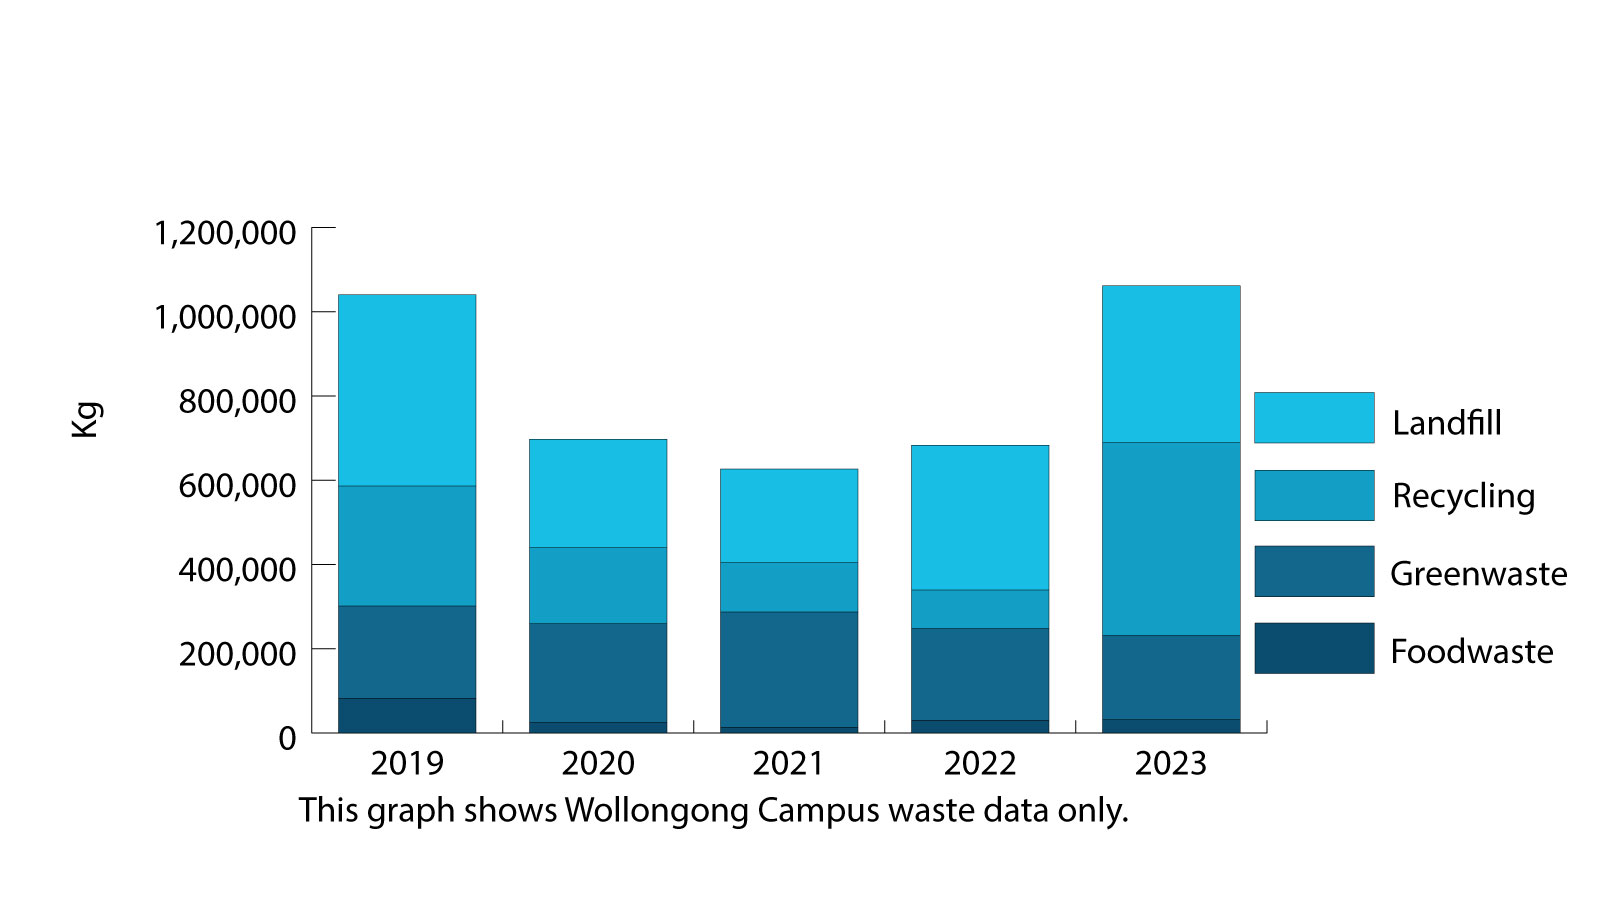 This graph shows the waste in kg disposed to greenwaste, foodwaste, recycling and landfill yearly from 2019 to 2023